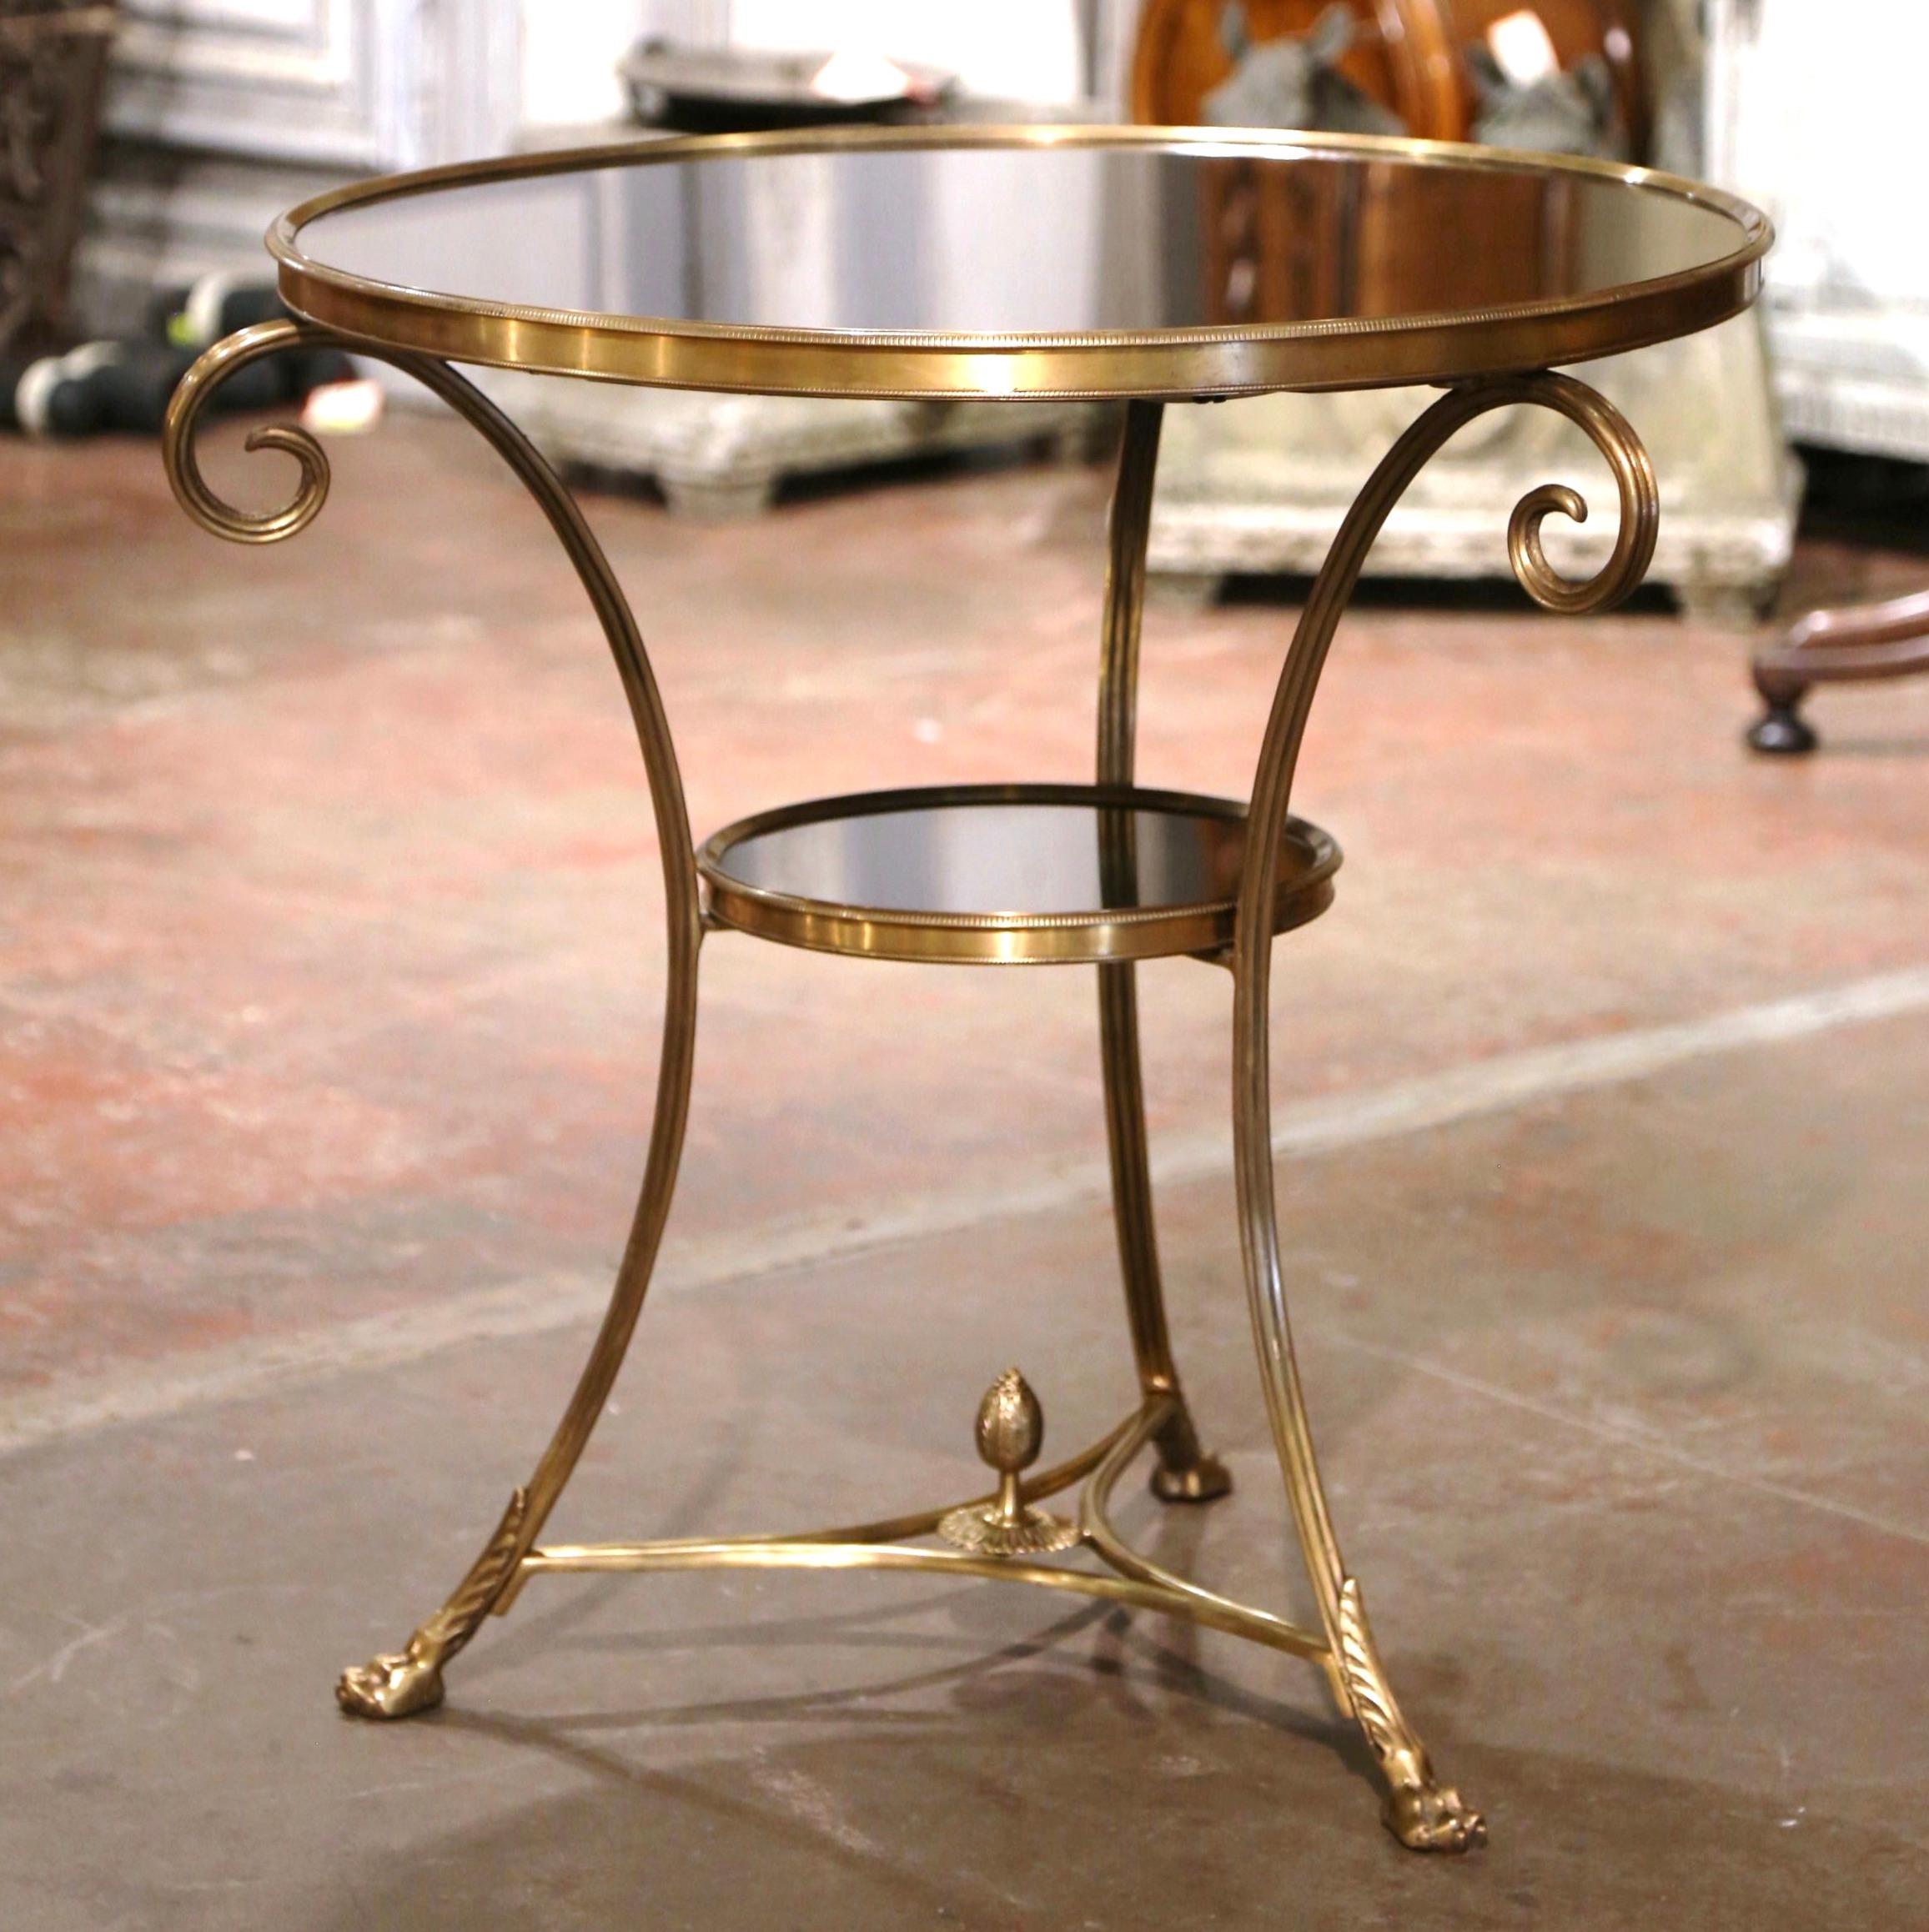 Decorate a living room with this elegant neoclassical antique two-tier gueridon table. Created in France circa 1950, and round in shape, the table is supported by three slender cabriole legs ending with hoof feet and decorated with acanthus leaf